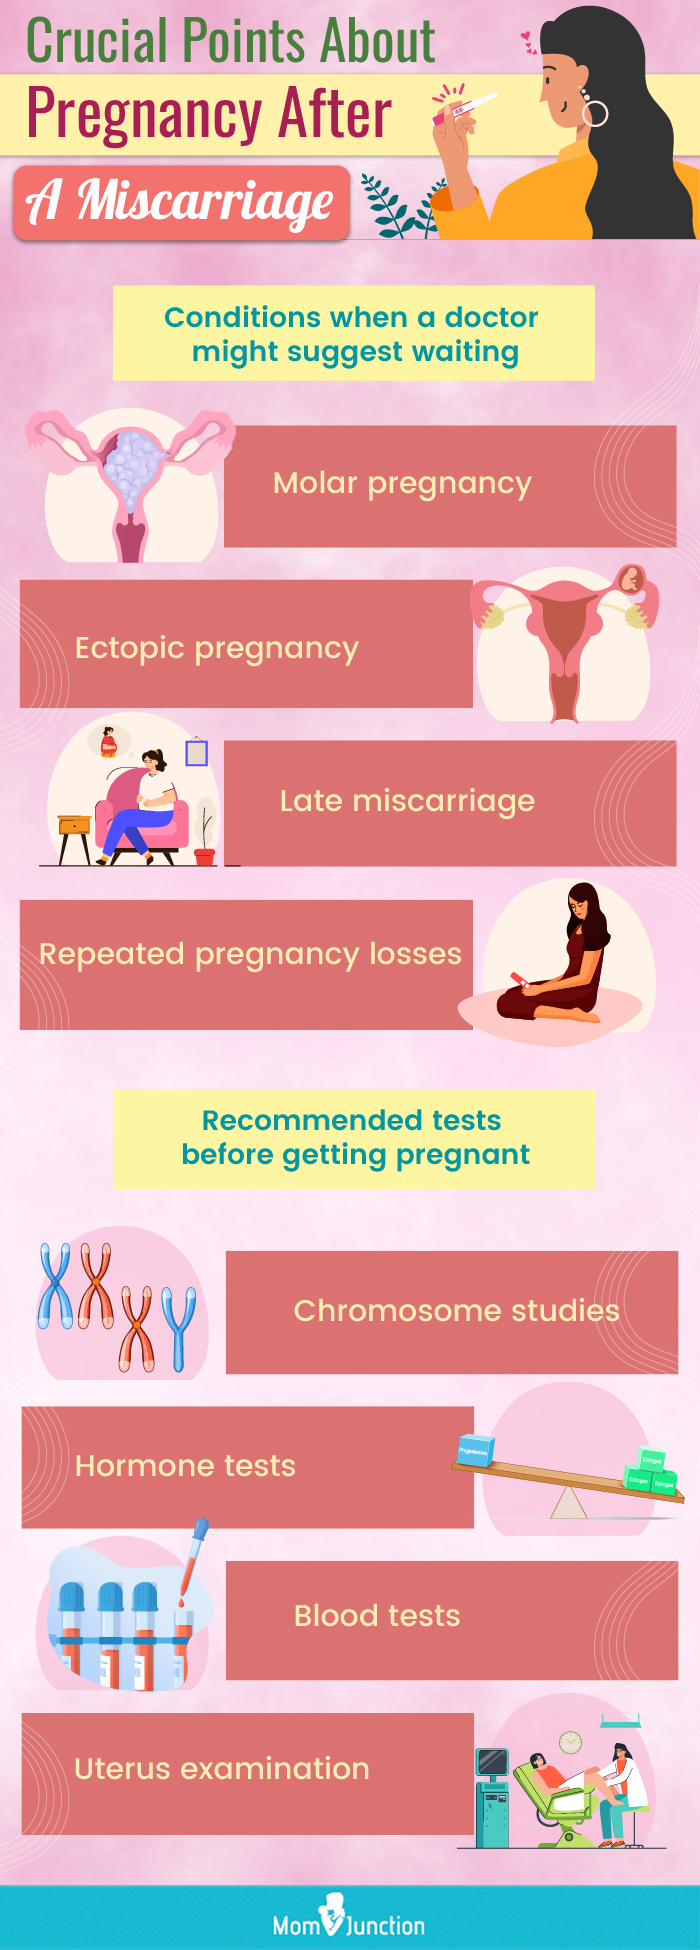 crucial points about pregnancy after a miscarriage (infographic)